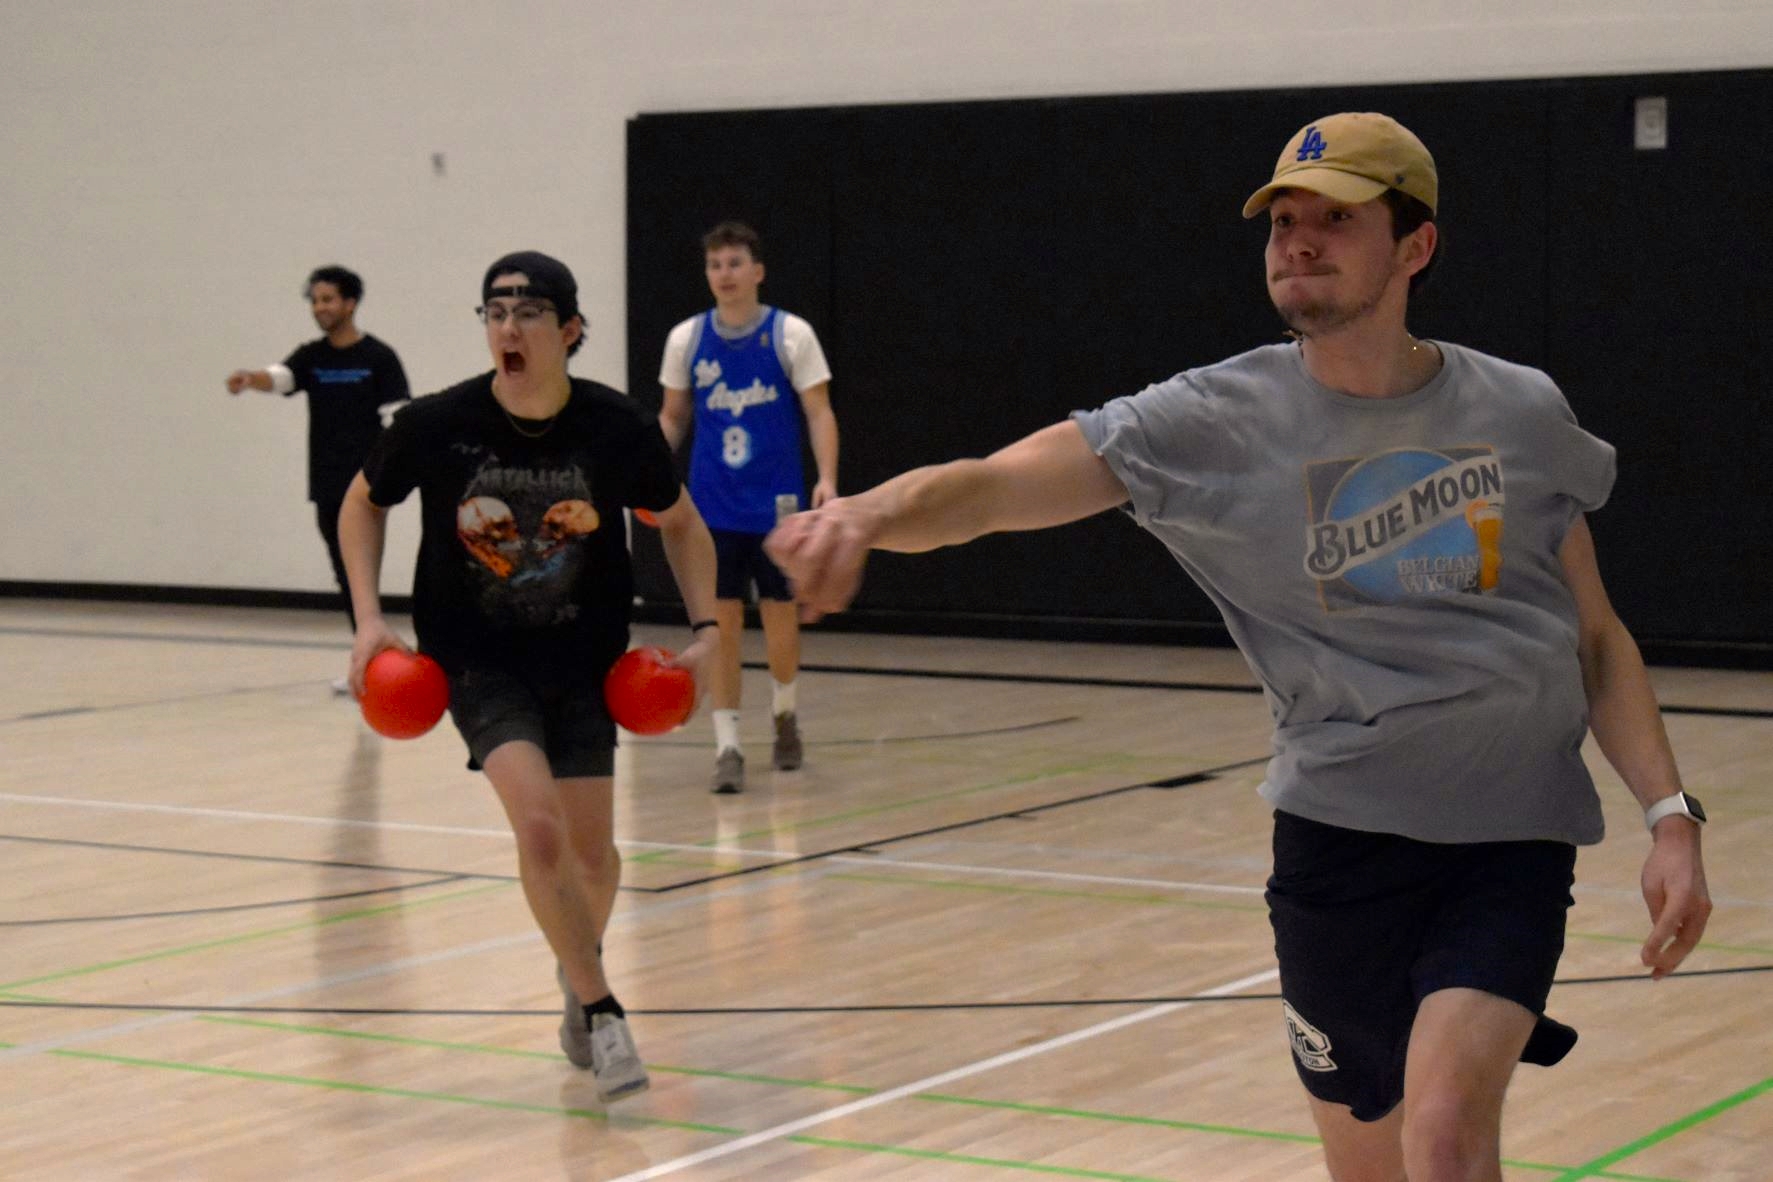 Participant Ethan Fisher used his baseball experience to his advantage.